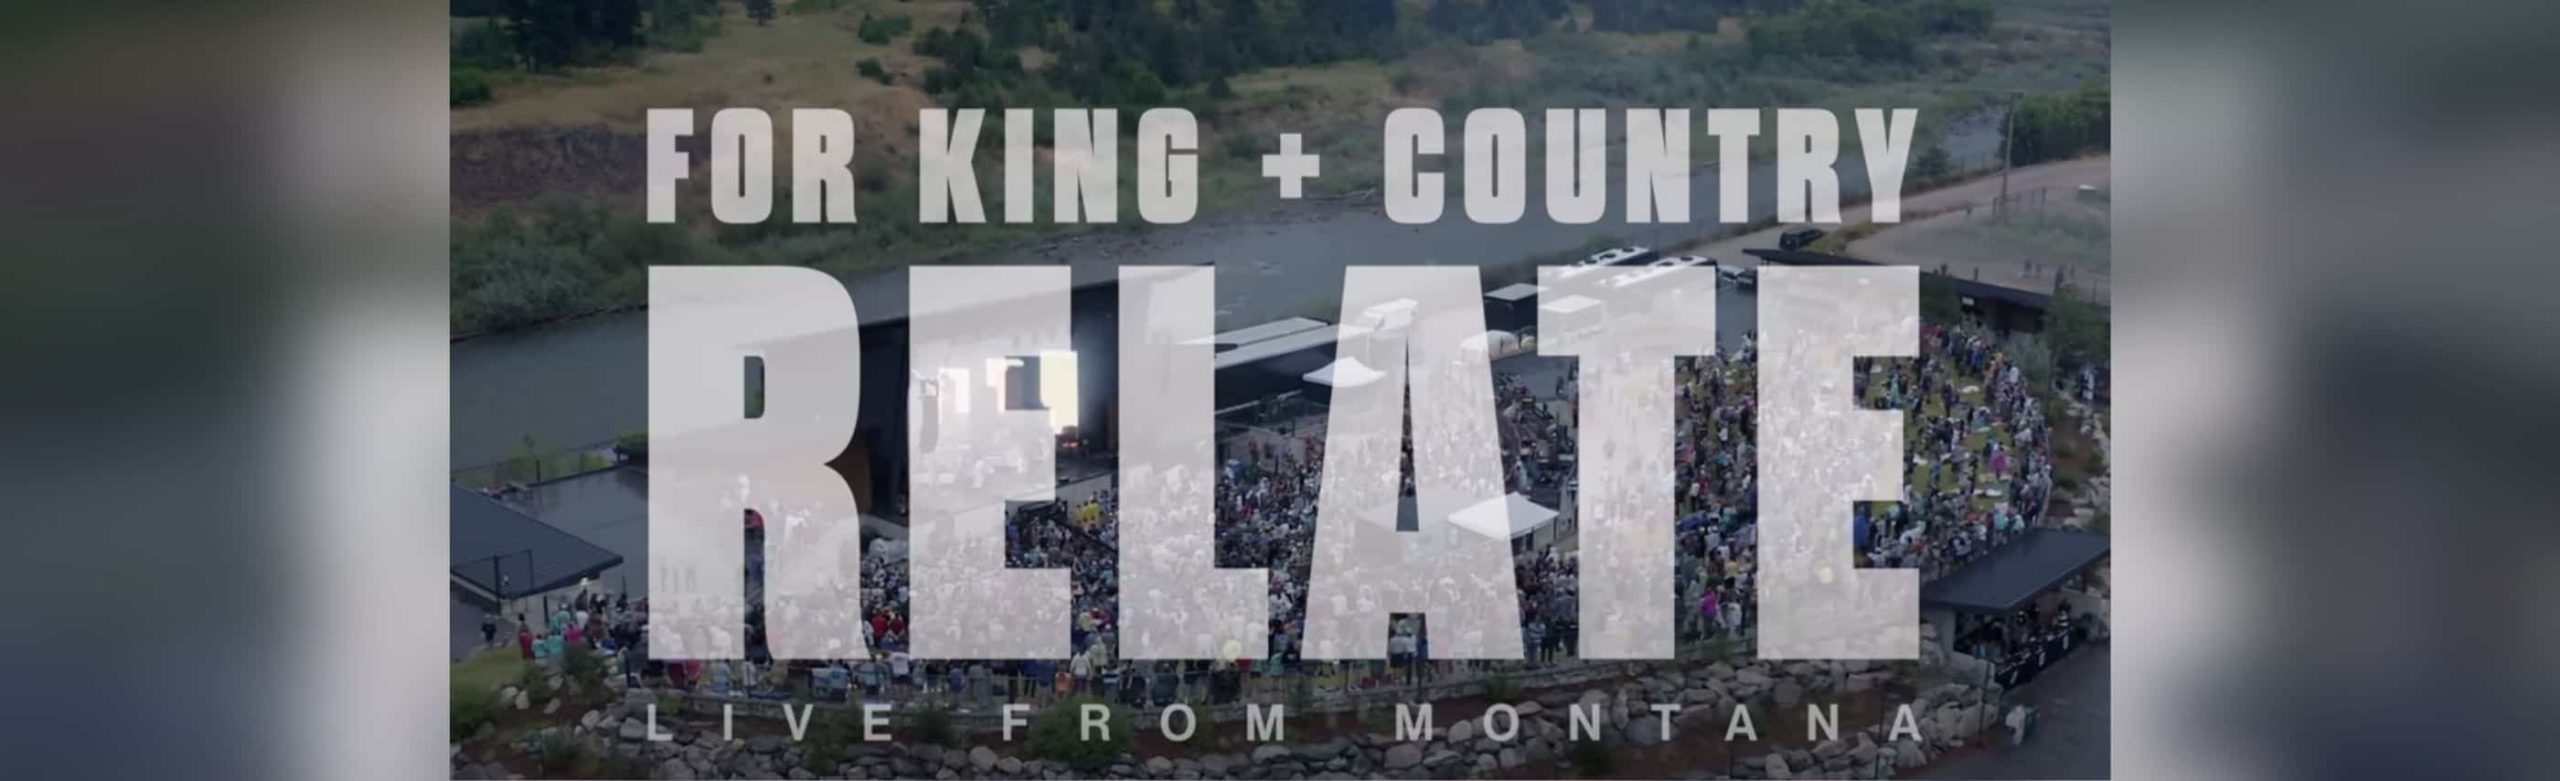 for KING & COUNTRY Share Performance of “Relate” Live from KettleHouse Amphitheater Image